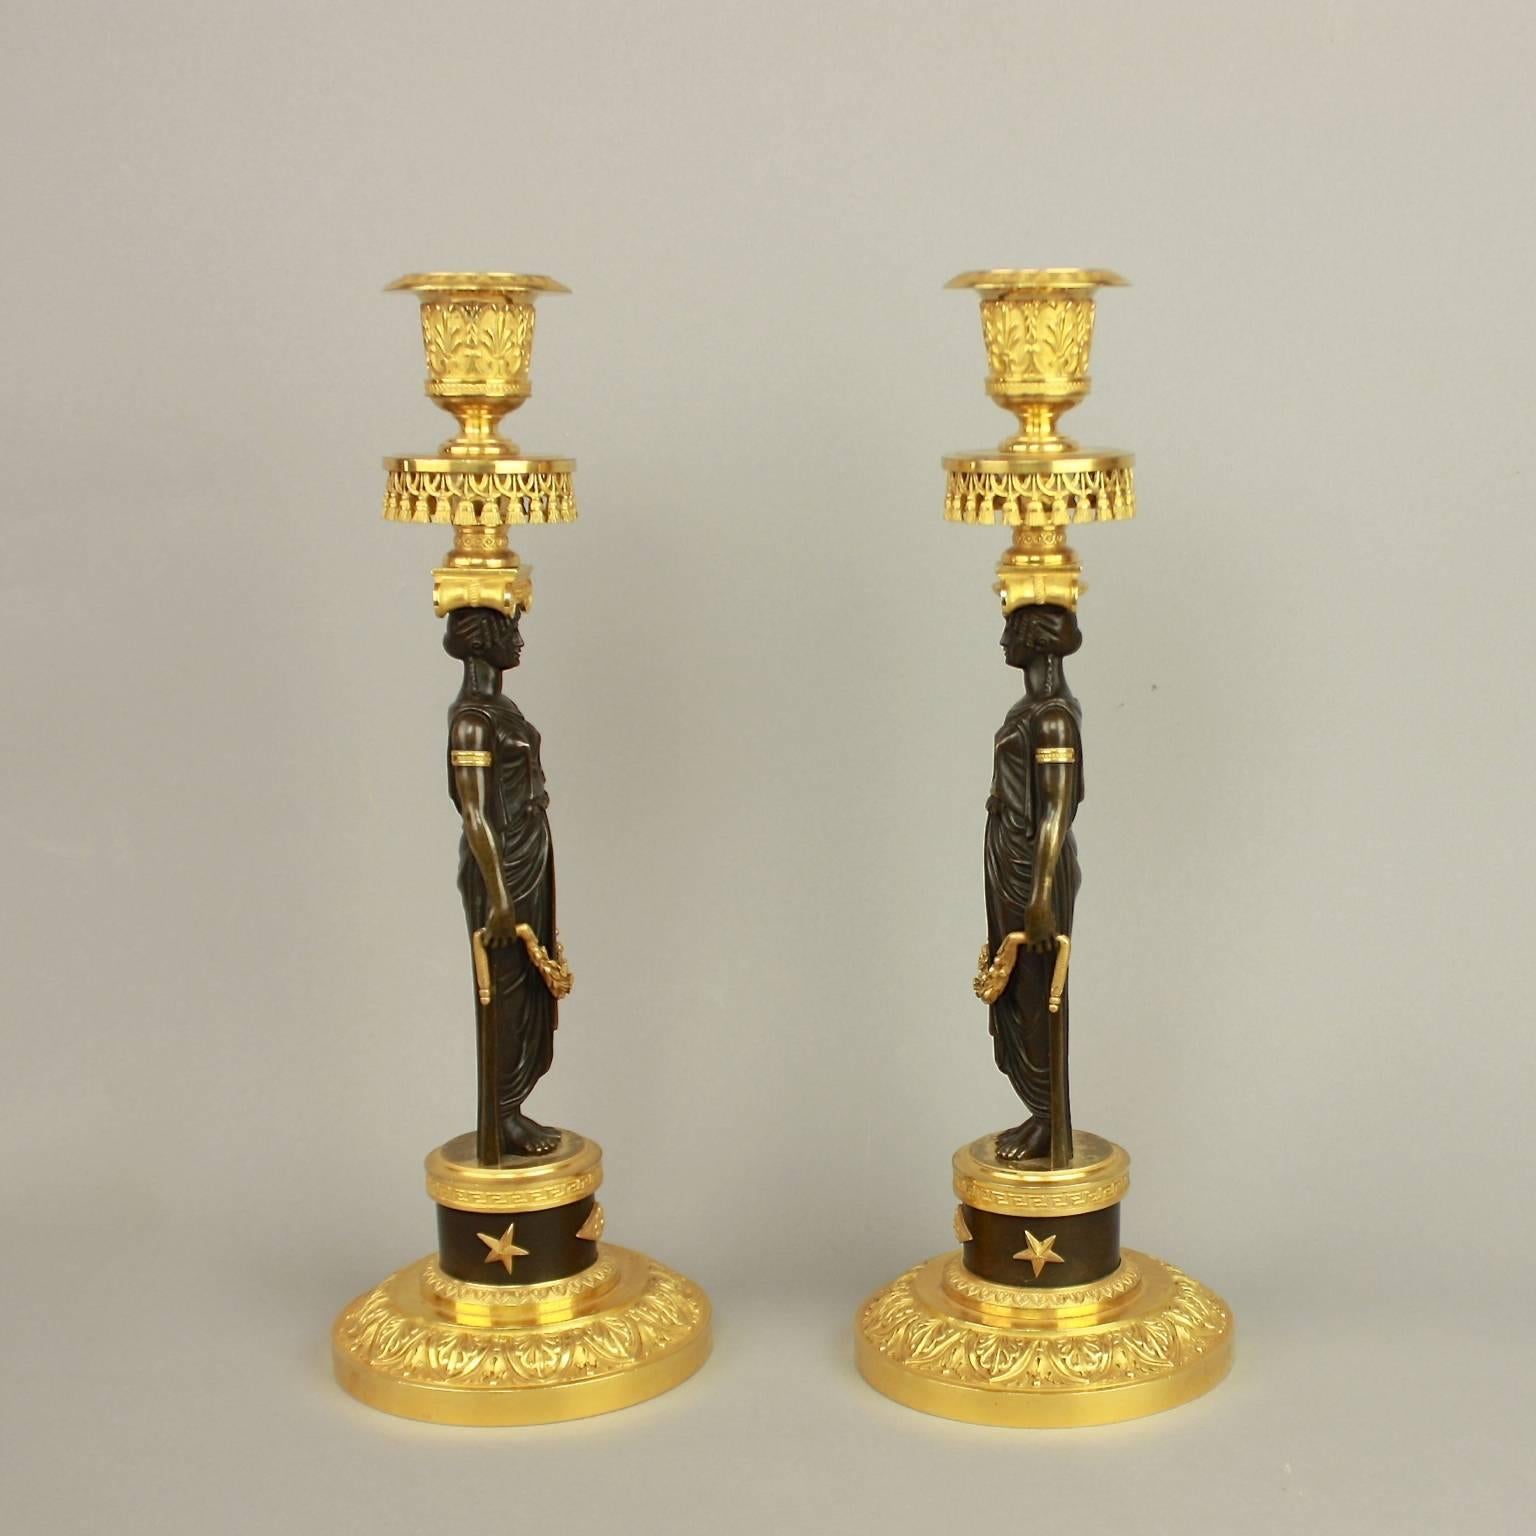 French Pair of Empire Ormolu and Patinated Bronze Candlestick in the Manner of C.Galle